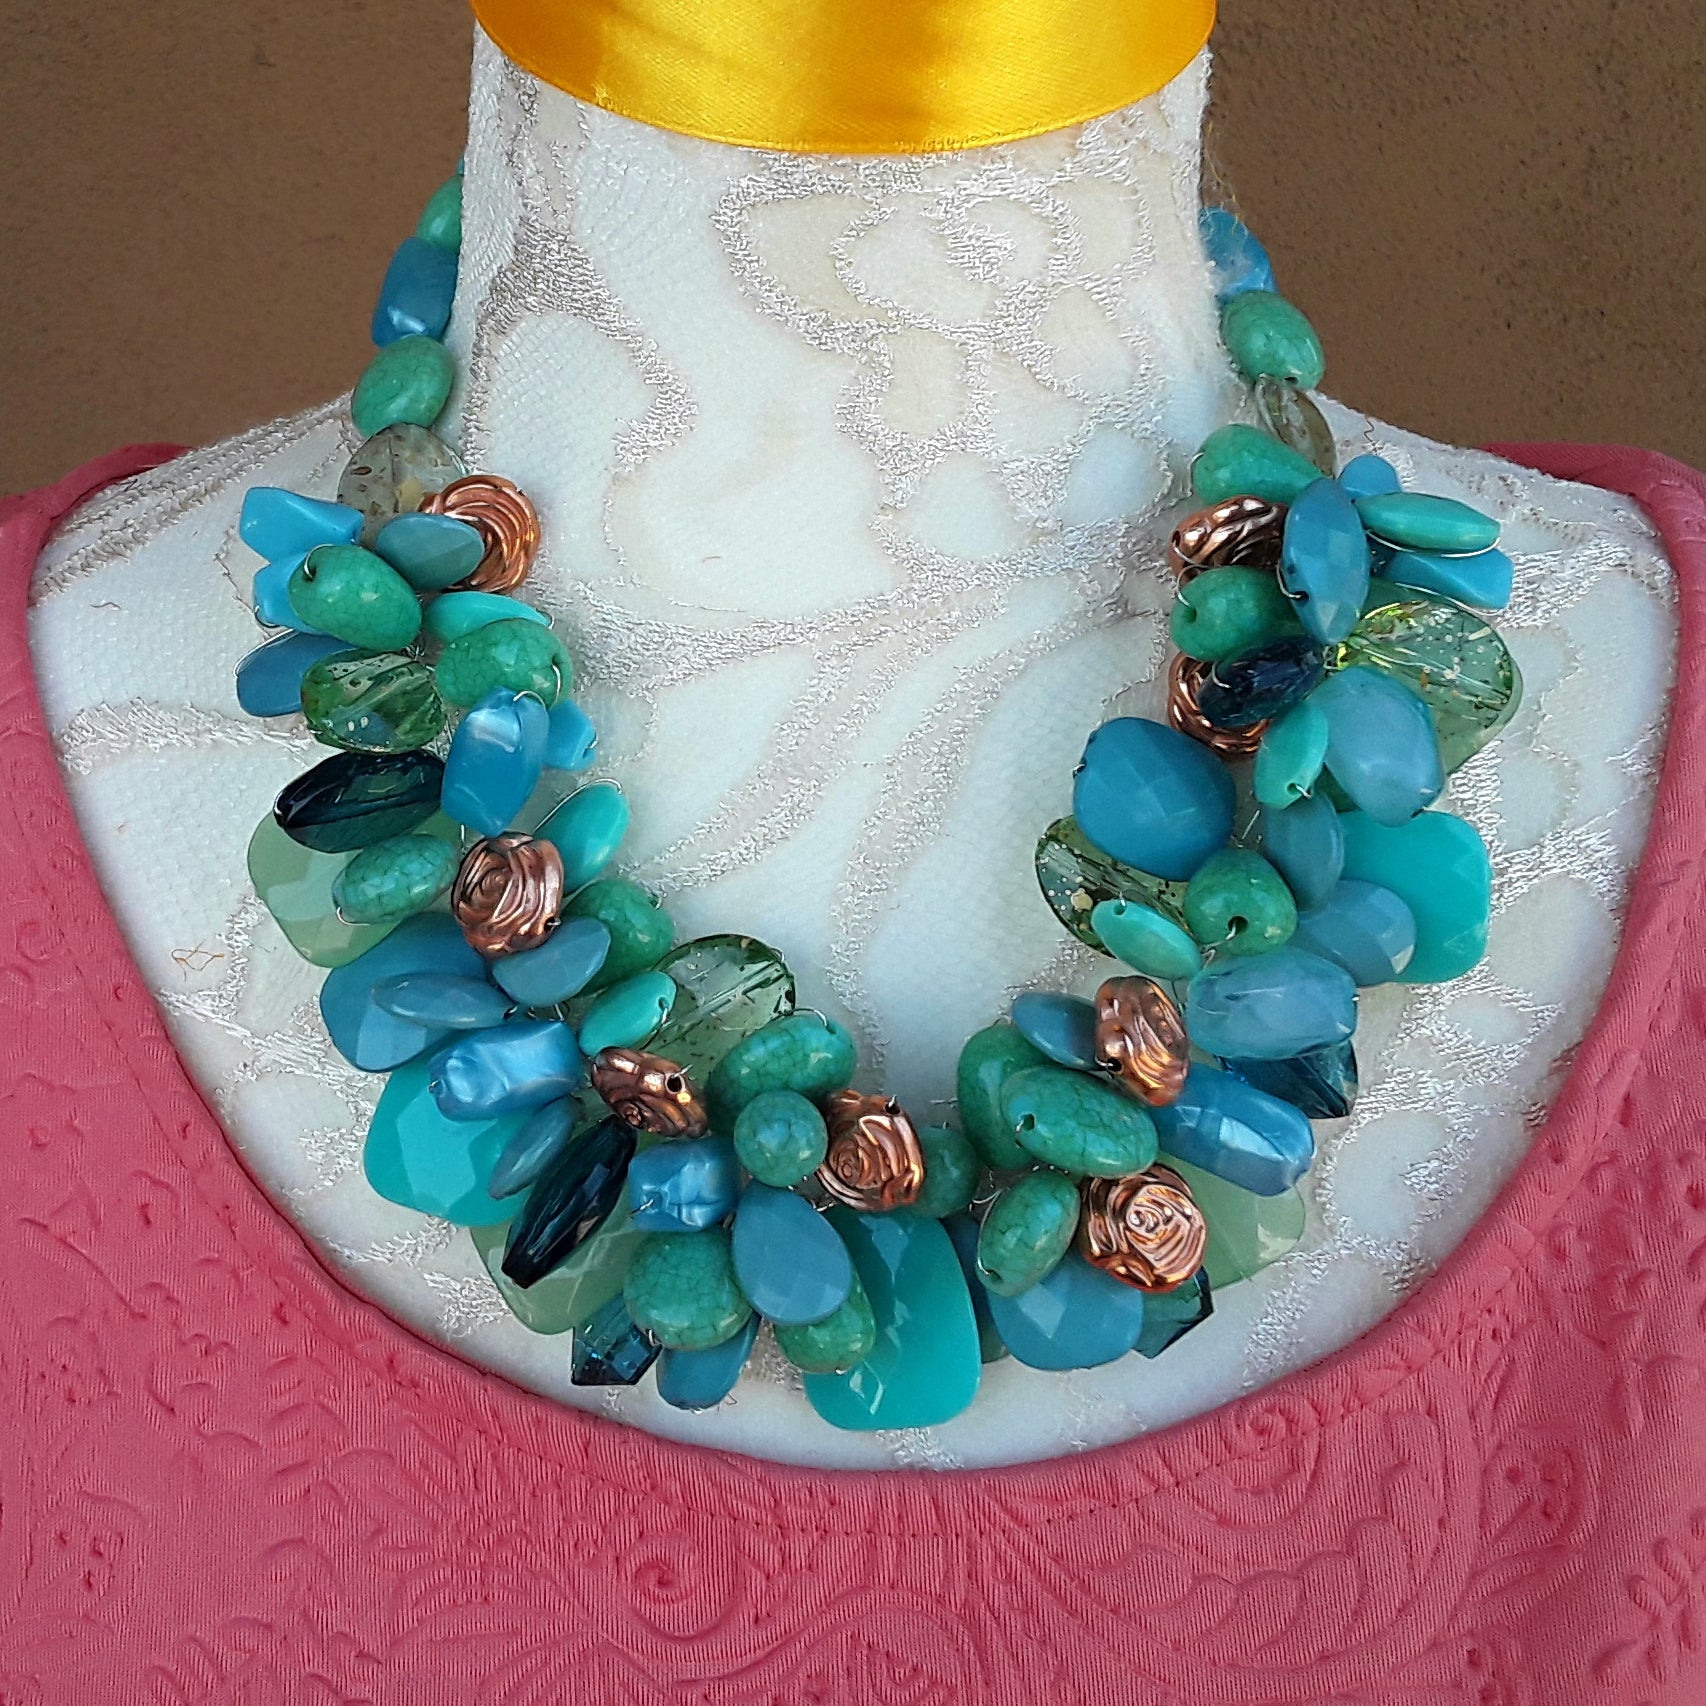 Pretty Turquoise Necklace - Beaded Necklace - Statement Necklace - $24.00 -  Lulus